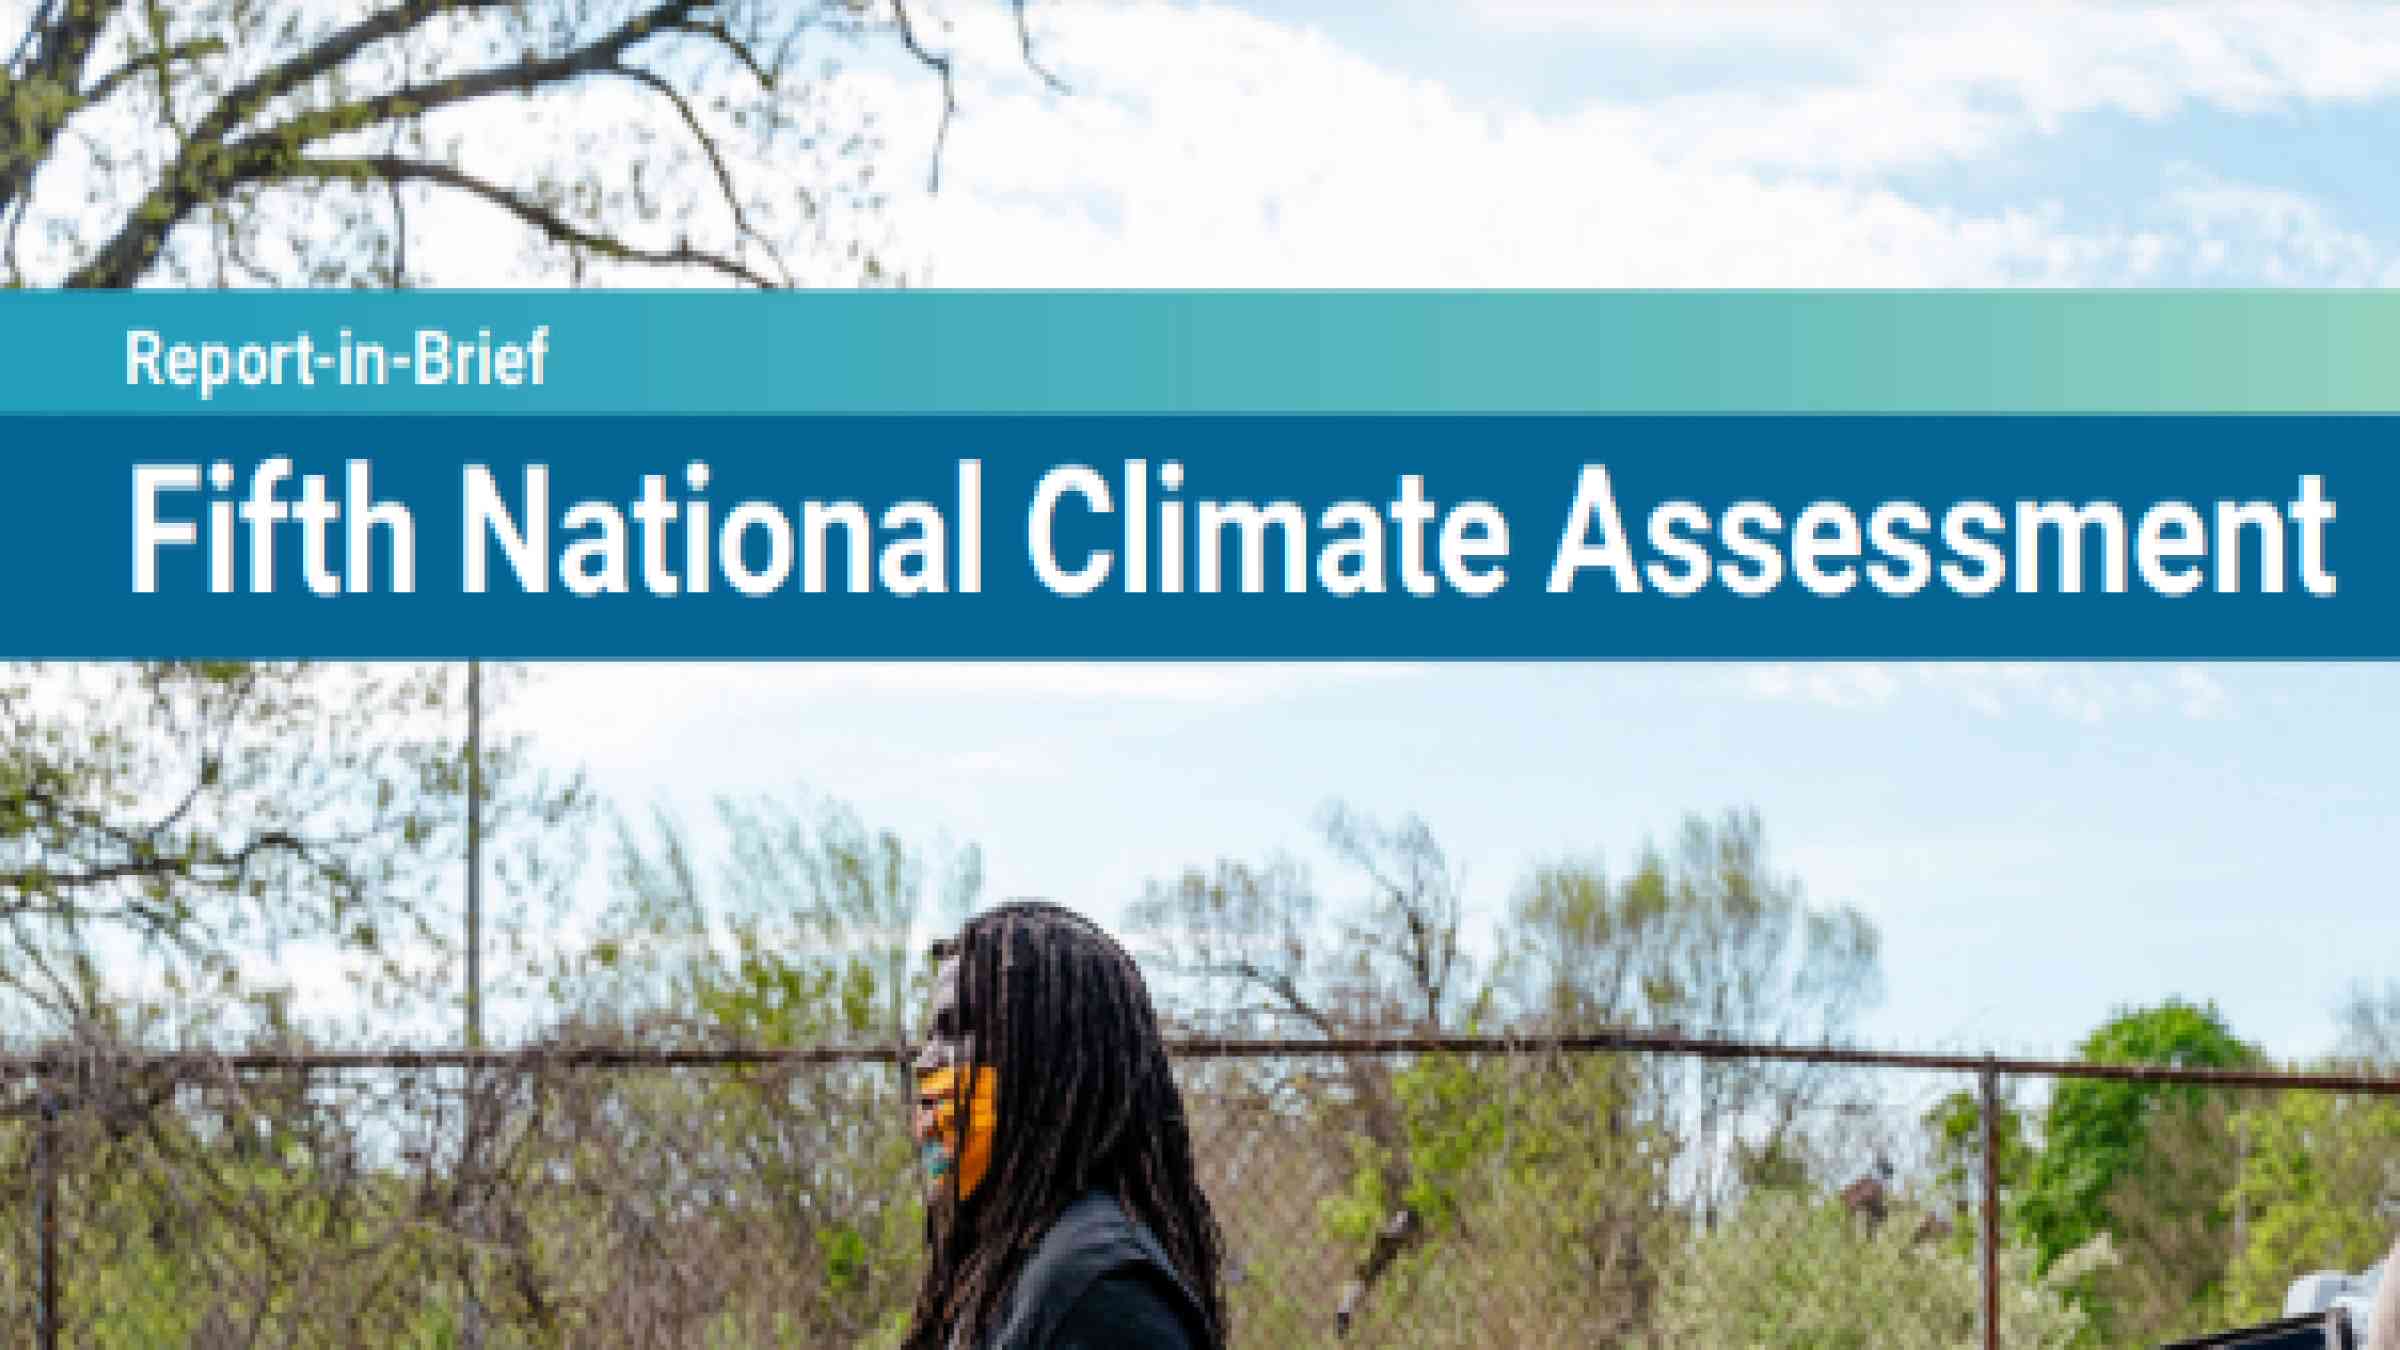 Fifth National Climate Assessment Preventionweb 8845